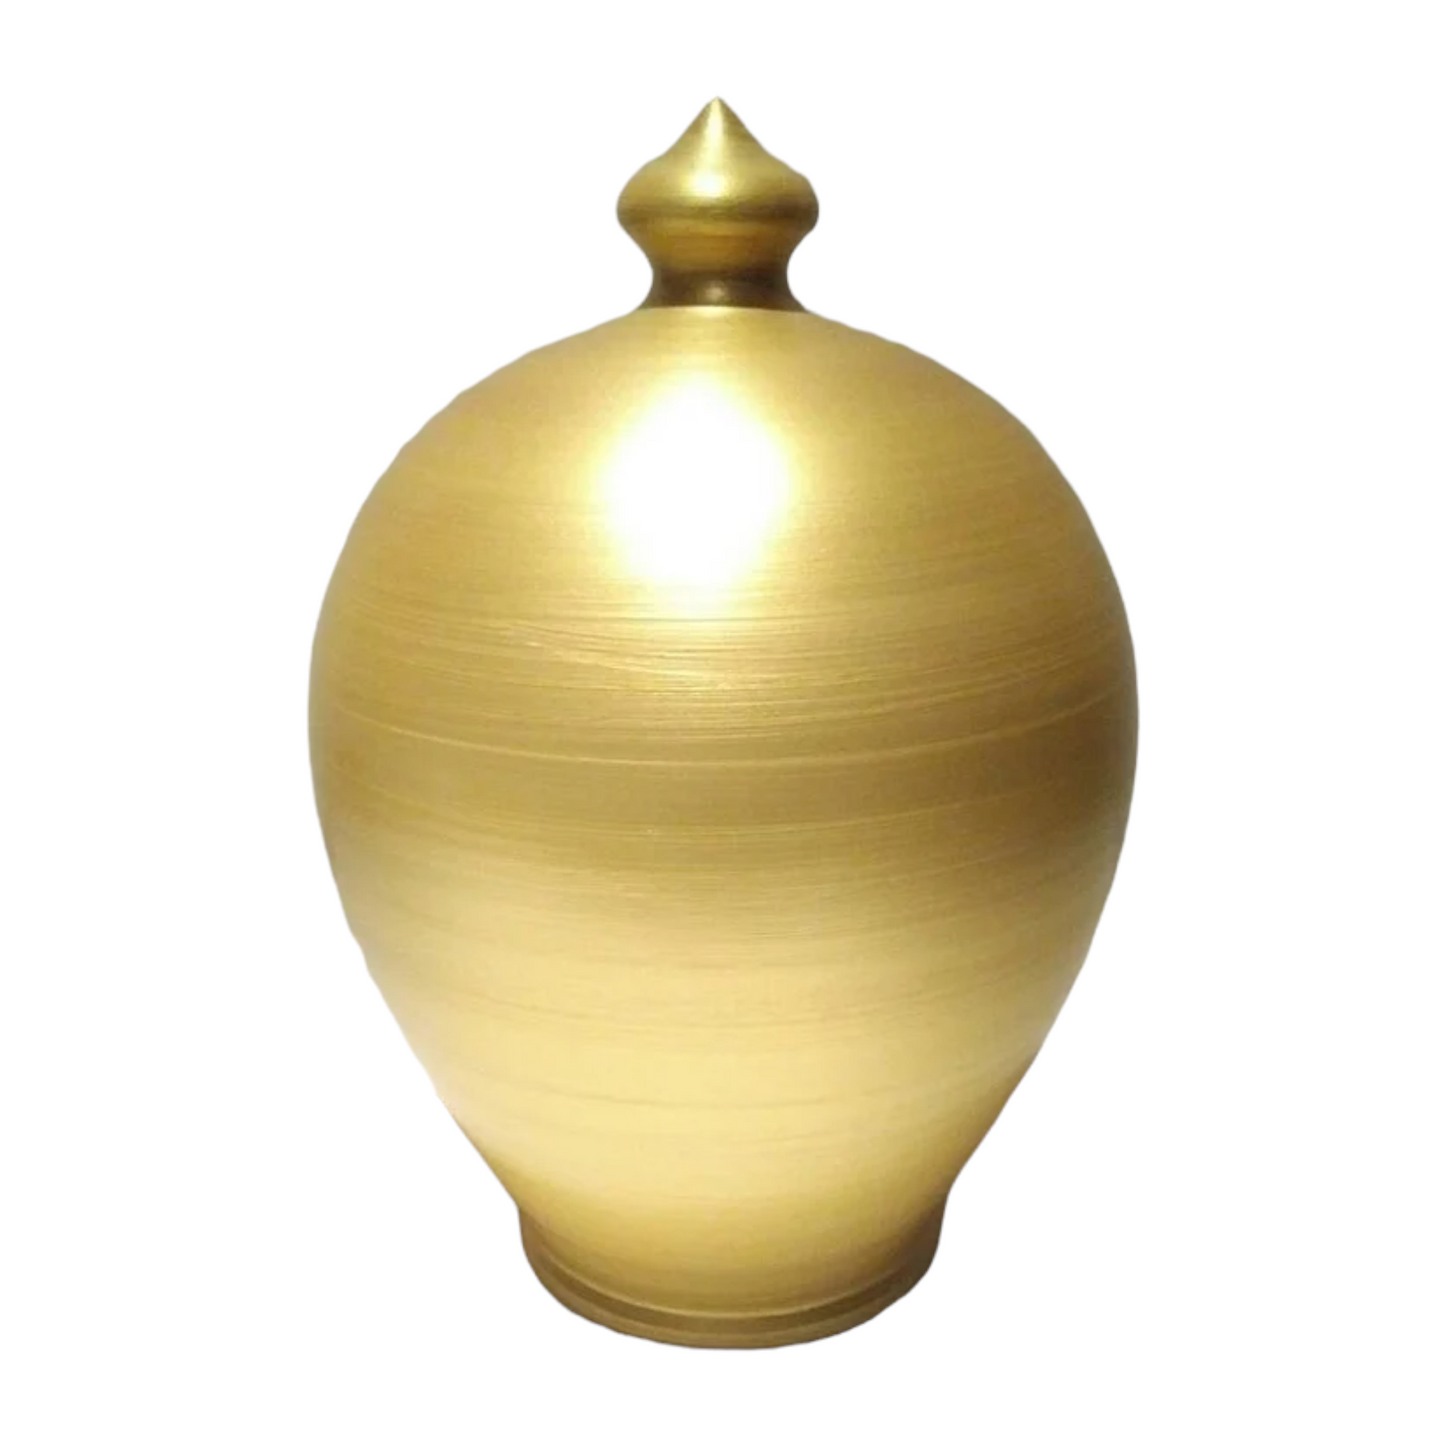 Handmade in Italy, the ideal gift for piggy bank lovers both kids and adults! Color: Gold, as in picture. 💰Size: 15 cm = 5.90 inches in height. Circumference: 40 cm = 15.74 inches. With hole and stopper plug, or without hole.